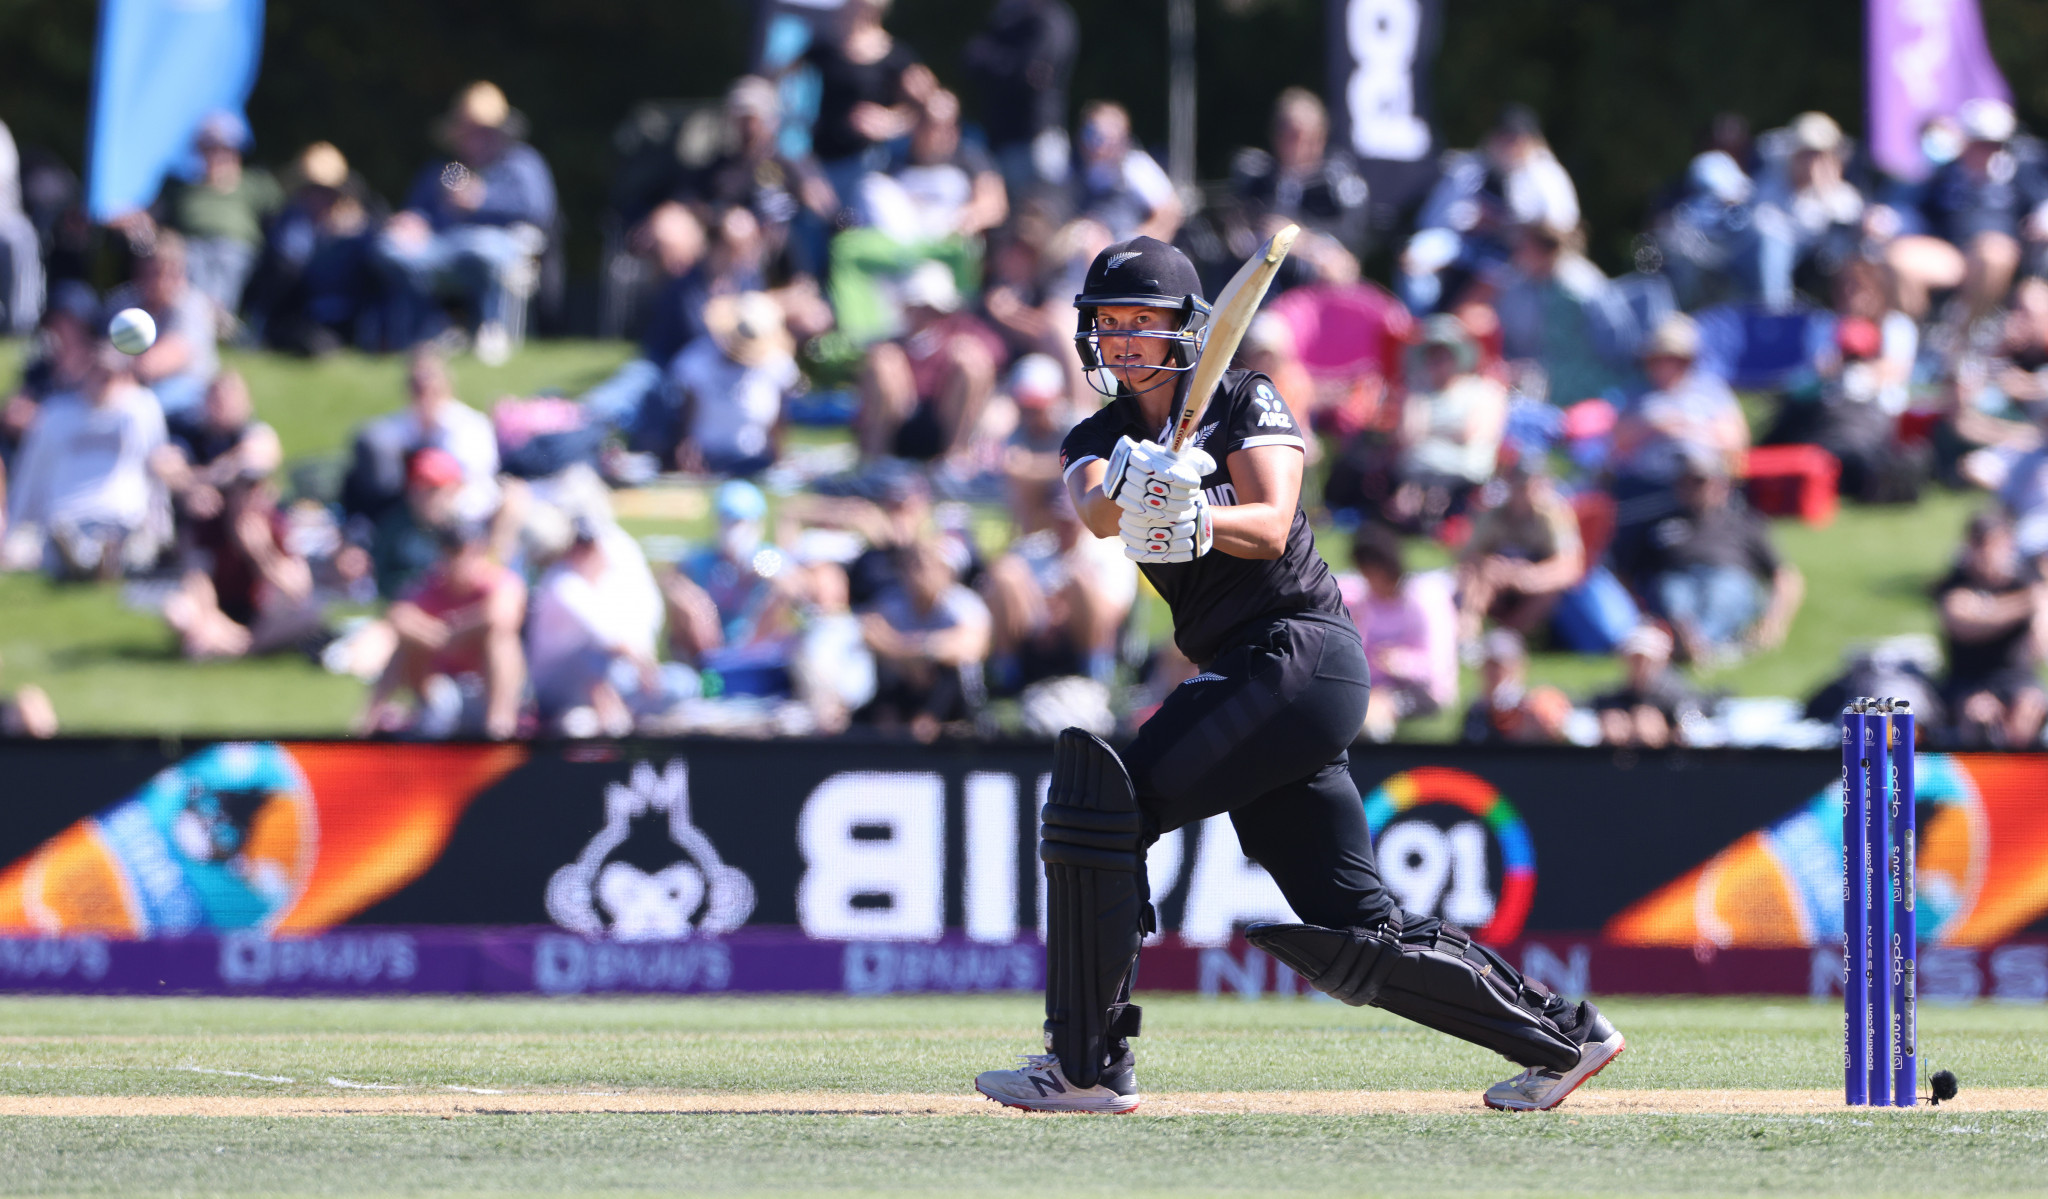 Sophie Bates is expected to star as one of New Zealand's batters at Birmingham 2022 ©Getty Images